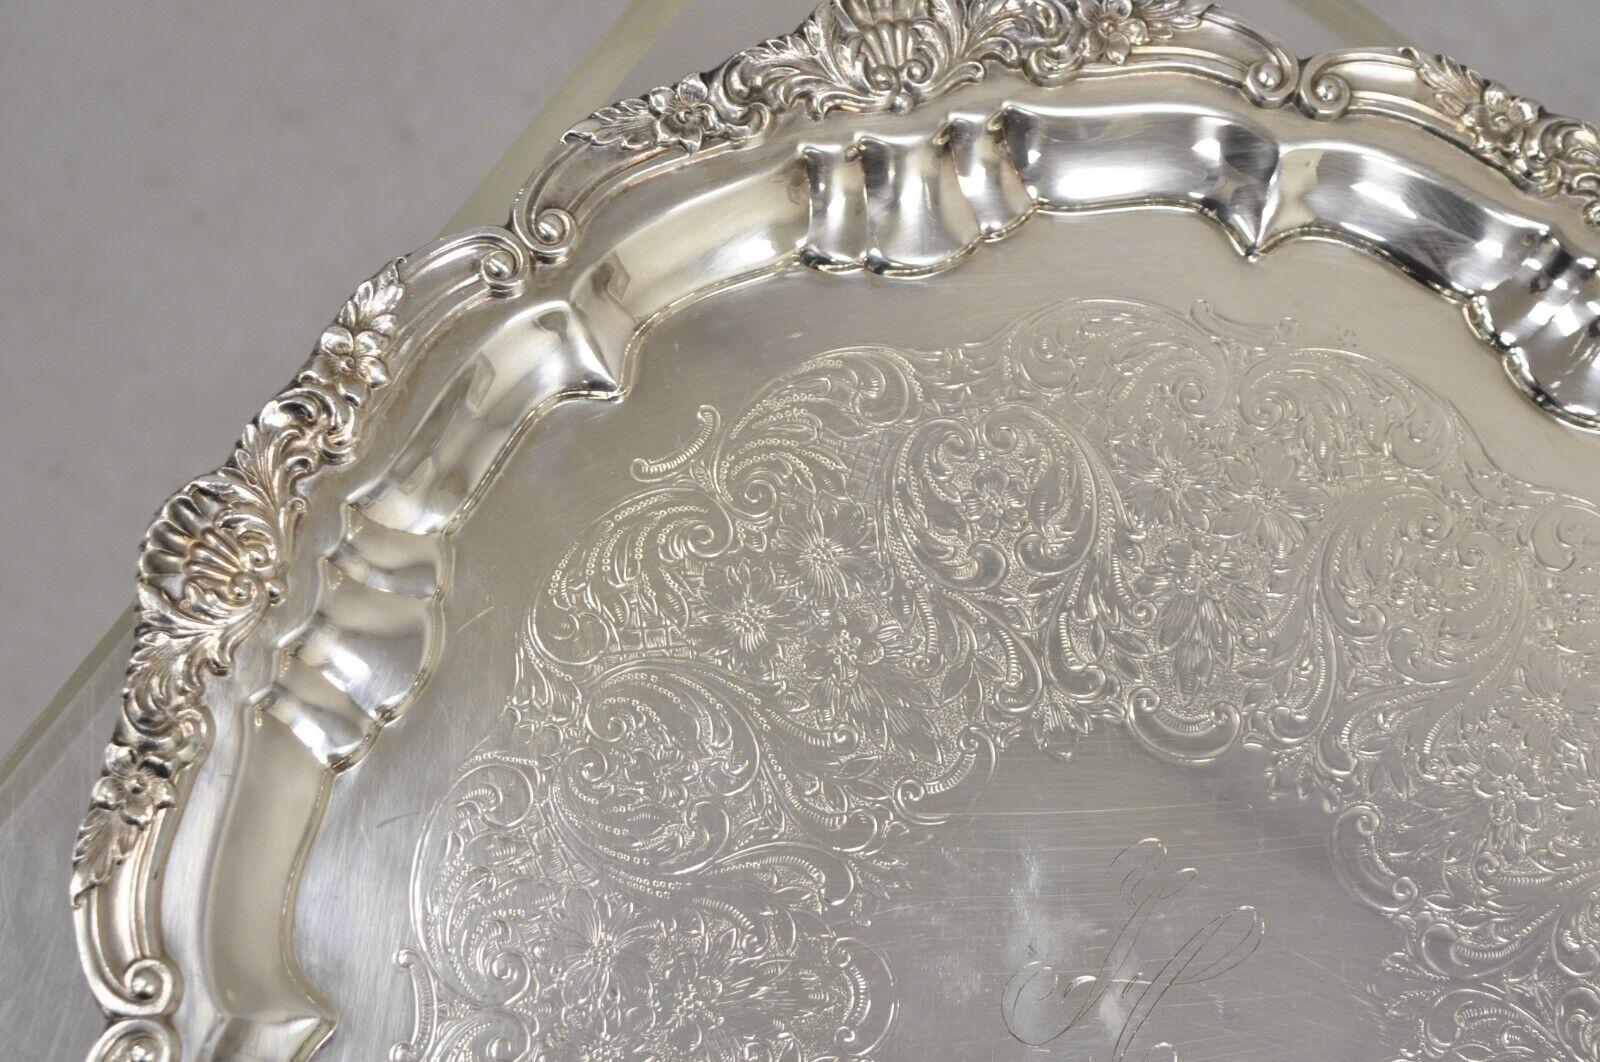 Vintage EPCA Silverplate by Poole 3216 Round Platter Tray - Engraved For Sale 2